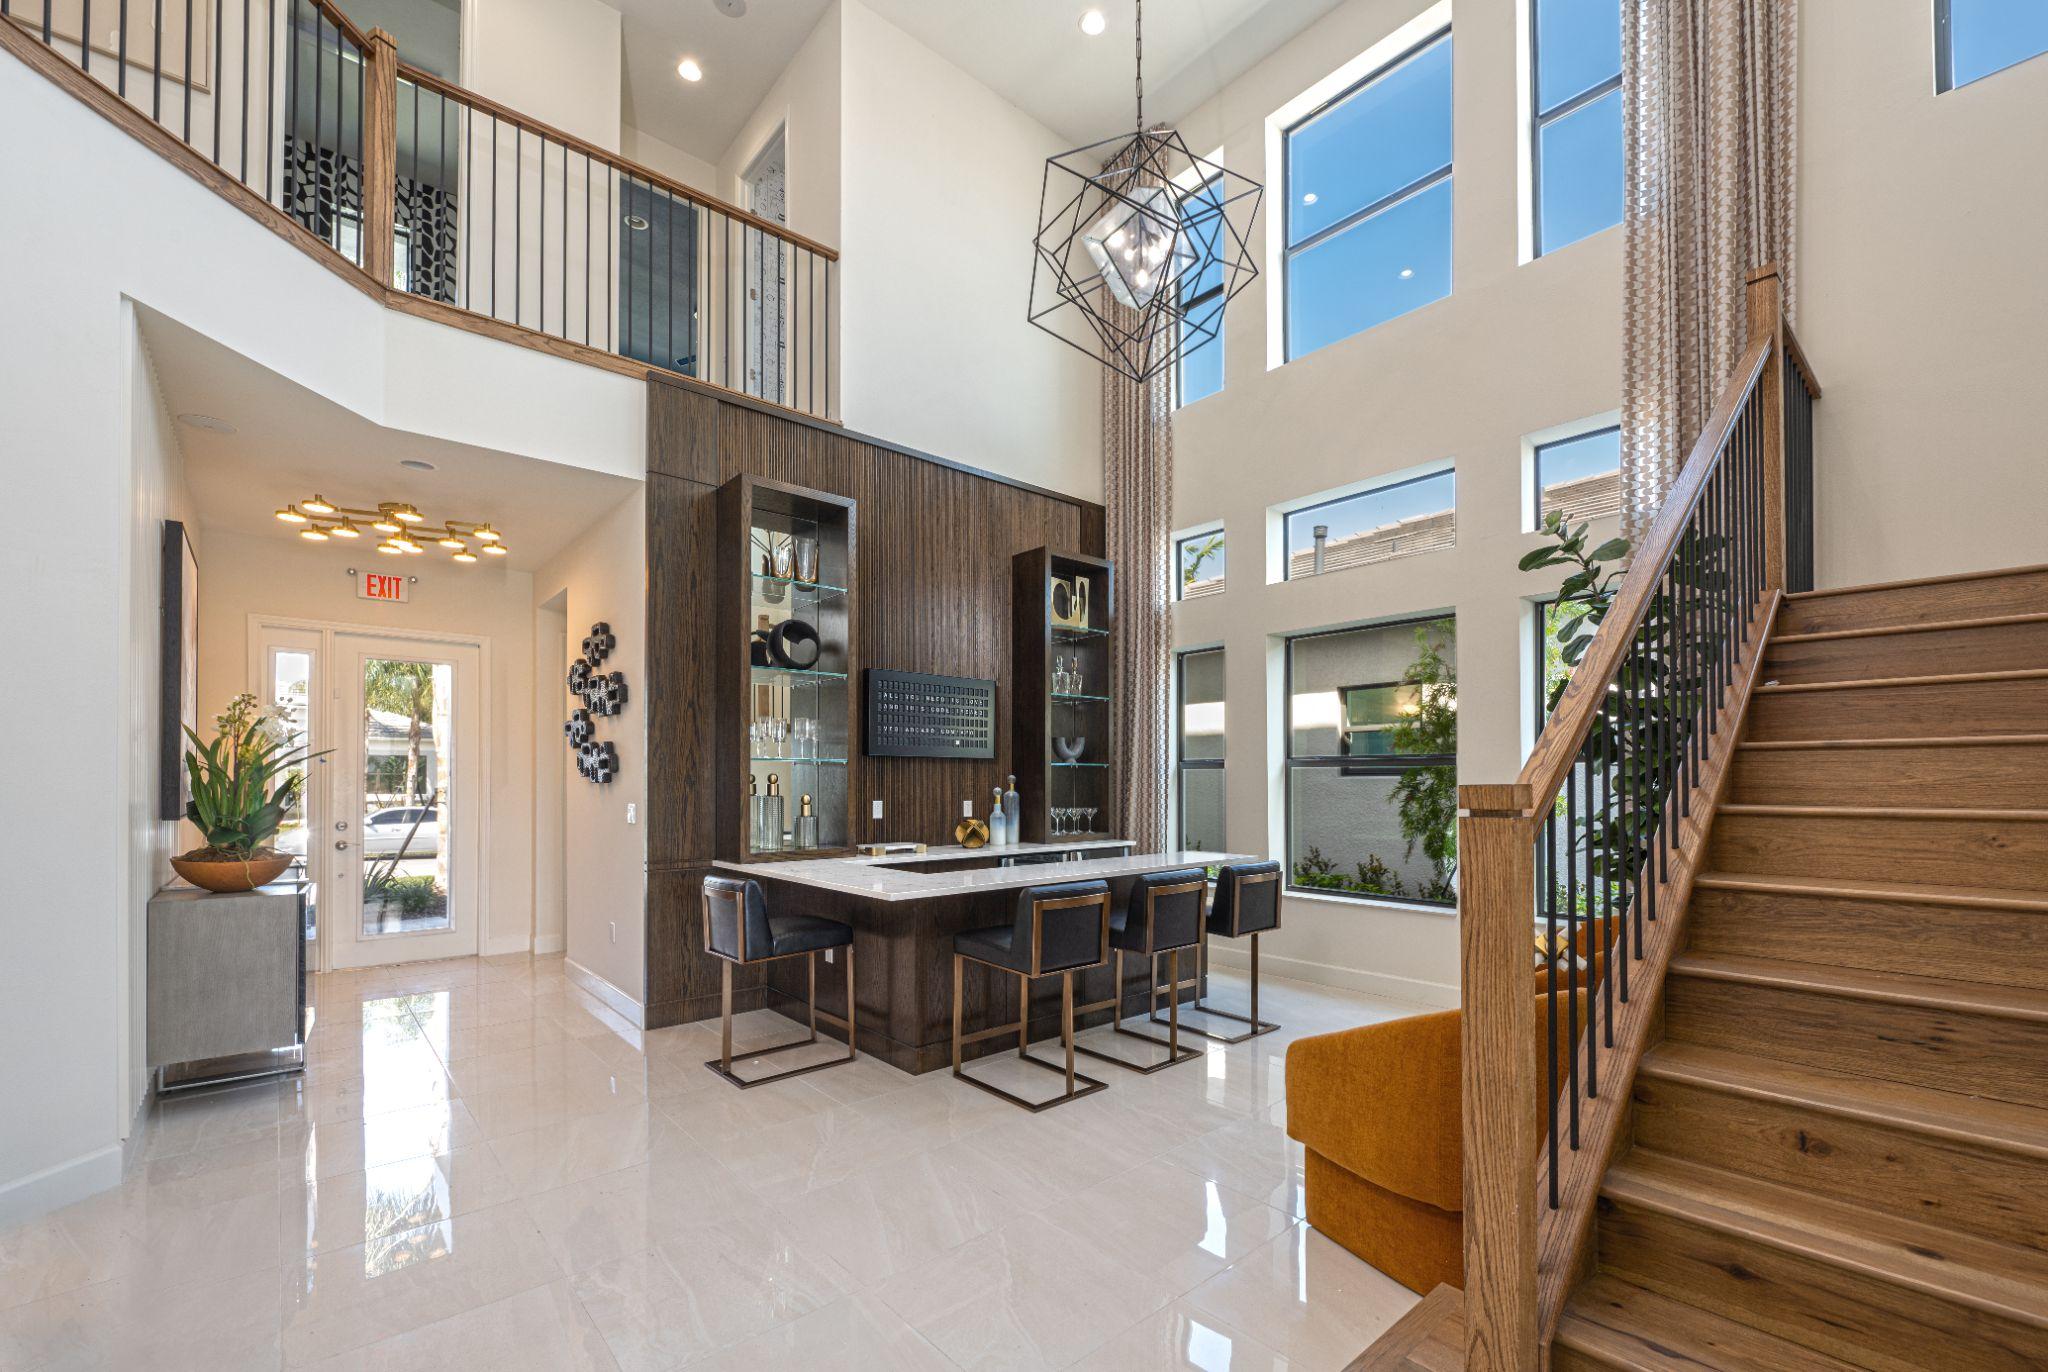 A picture of a home interior for the GL Homes Cascade plan at RiverCreek, located in Estero, Florida.